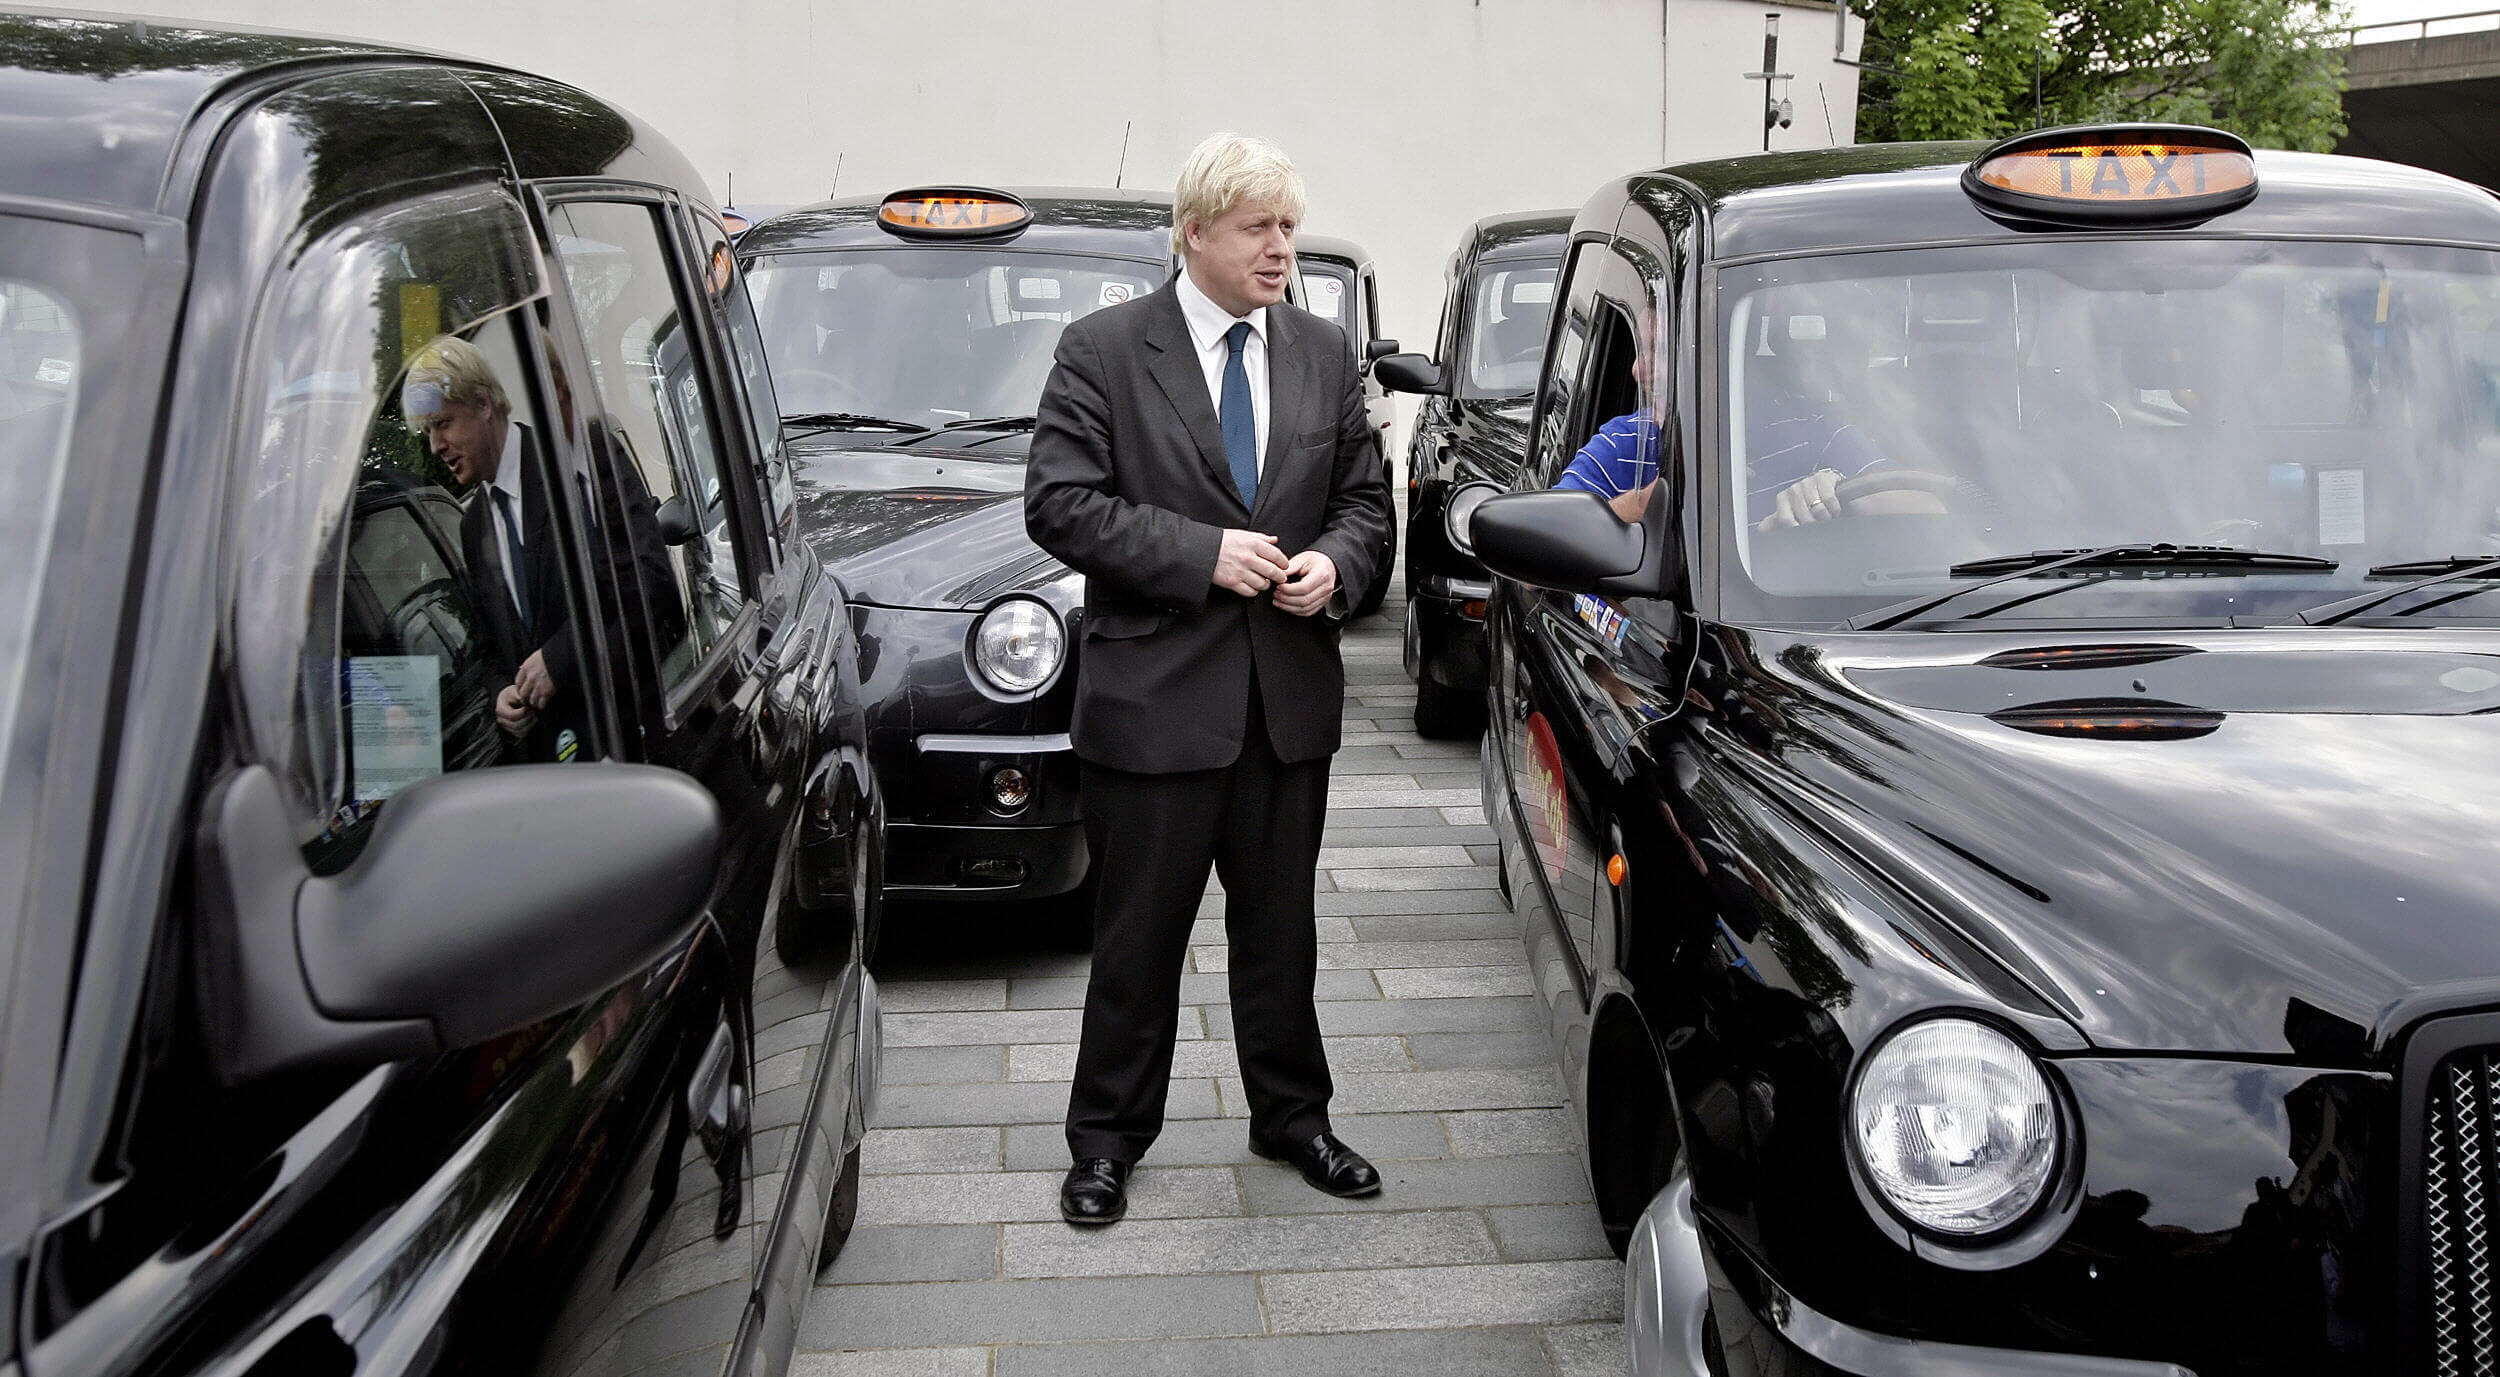 Boris Johnson standing next to iconic London Black Cabs in 2008, at the time a newly elected Mayor of London